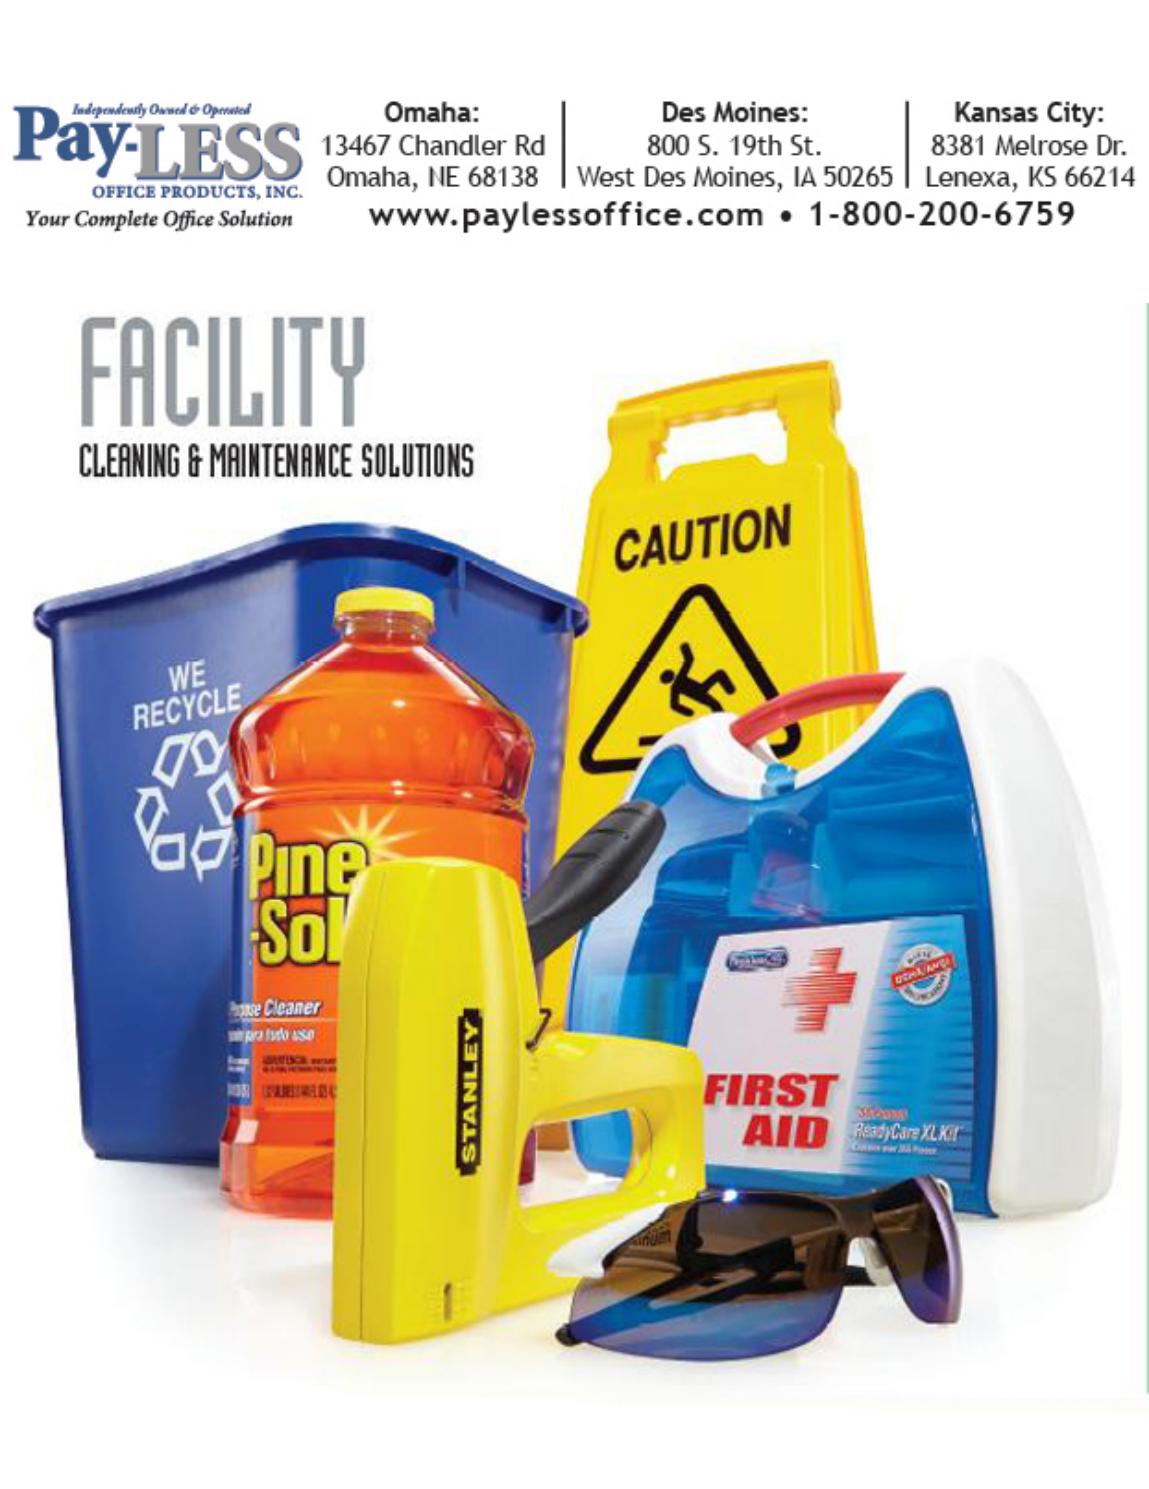 Facility Cleaning And Maintenance Solutions By Pay Less